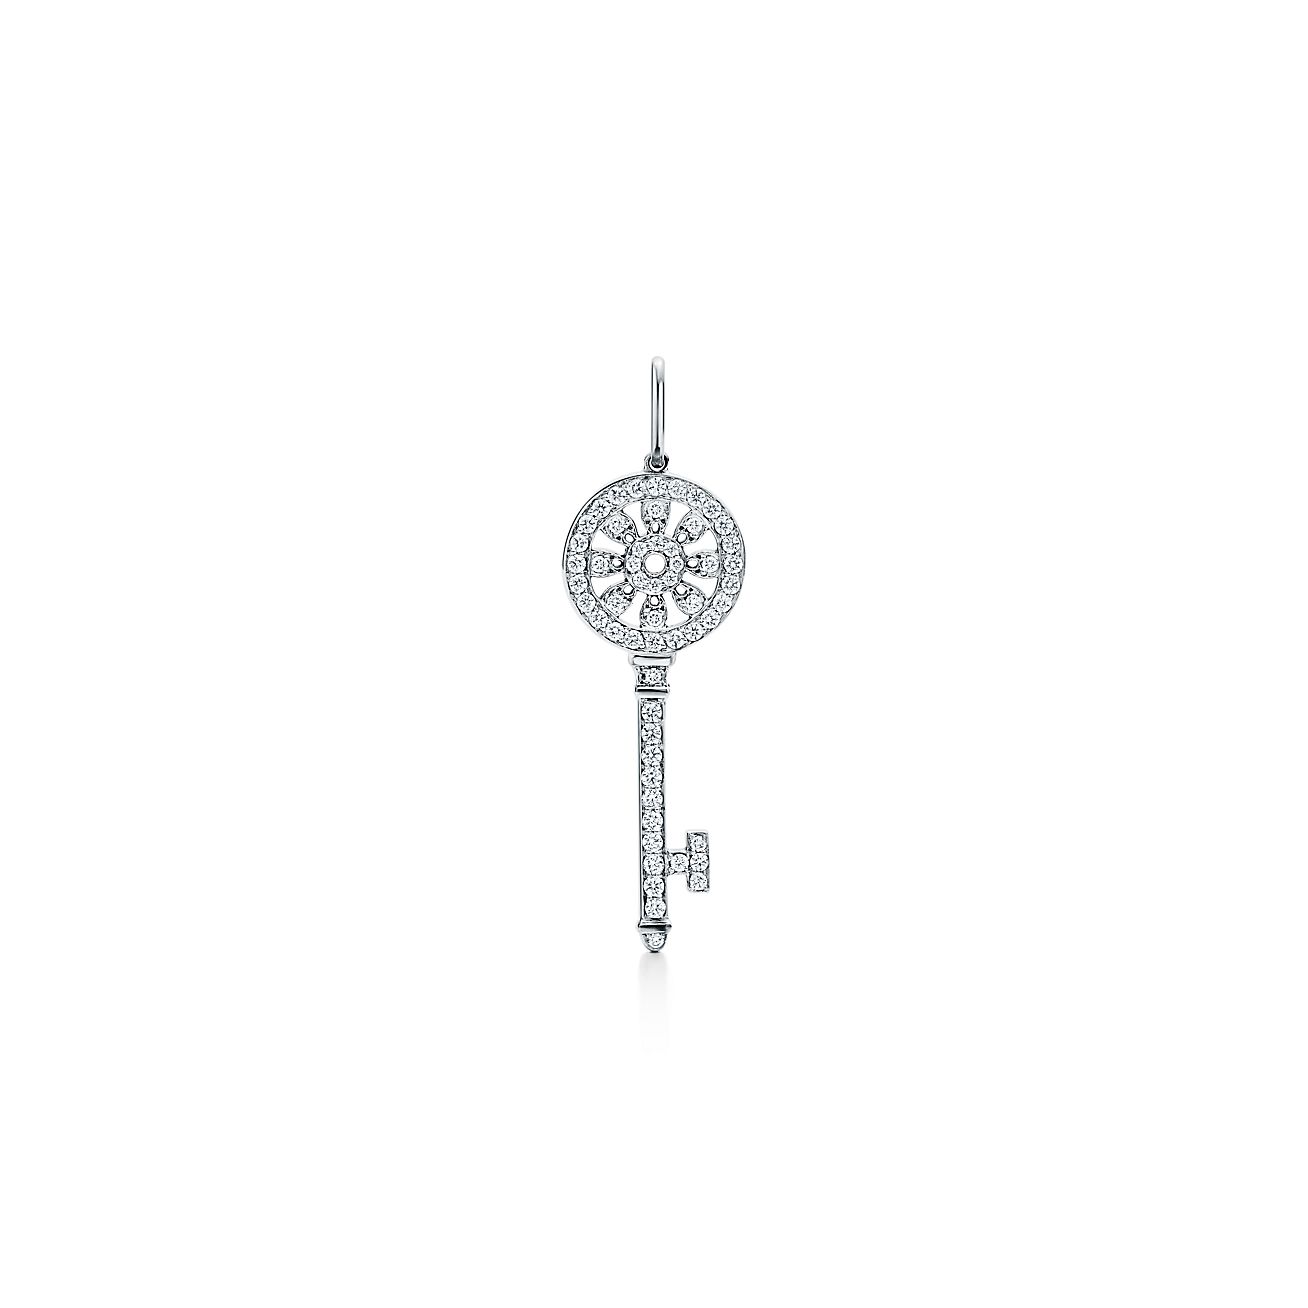 Tiffany and Co. Platinum Diamond Key and Lock Pendant For Sale at